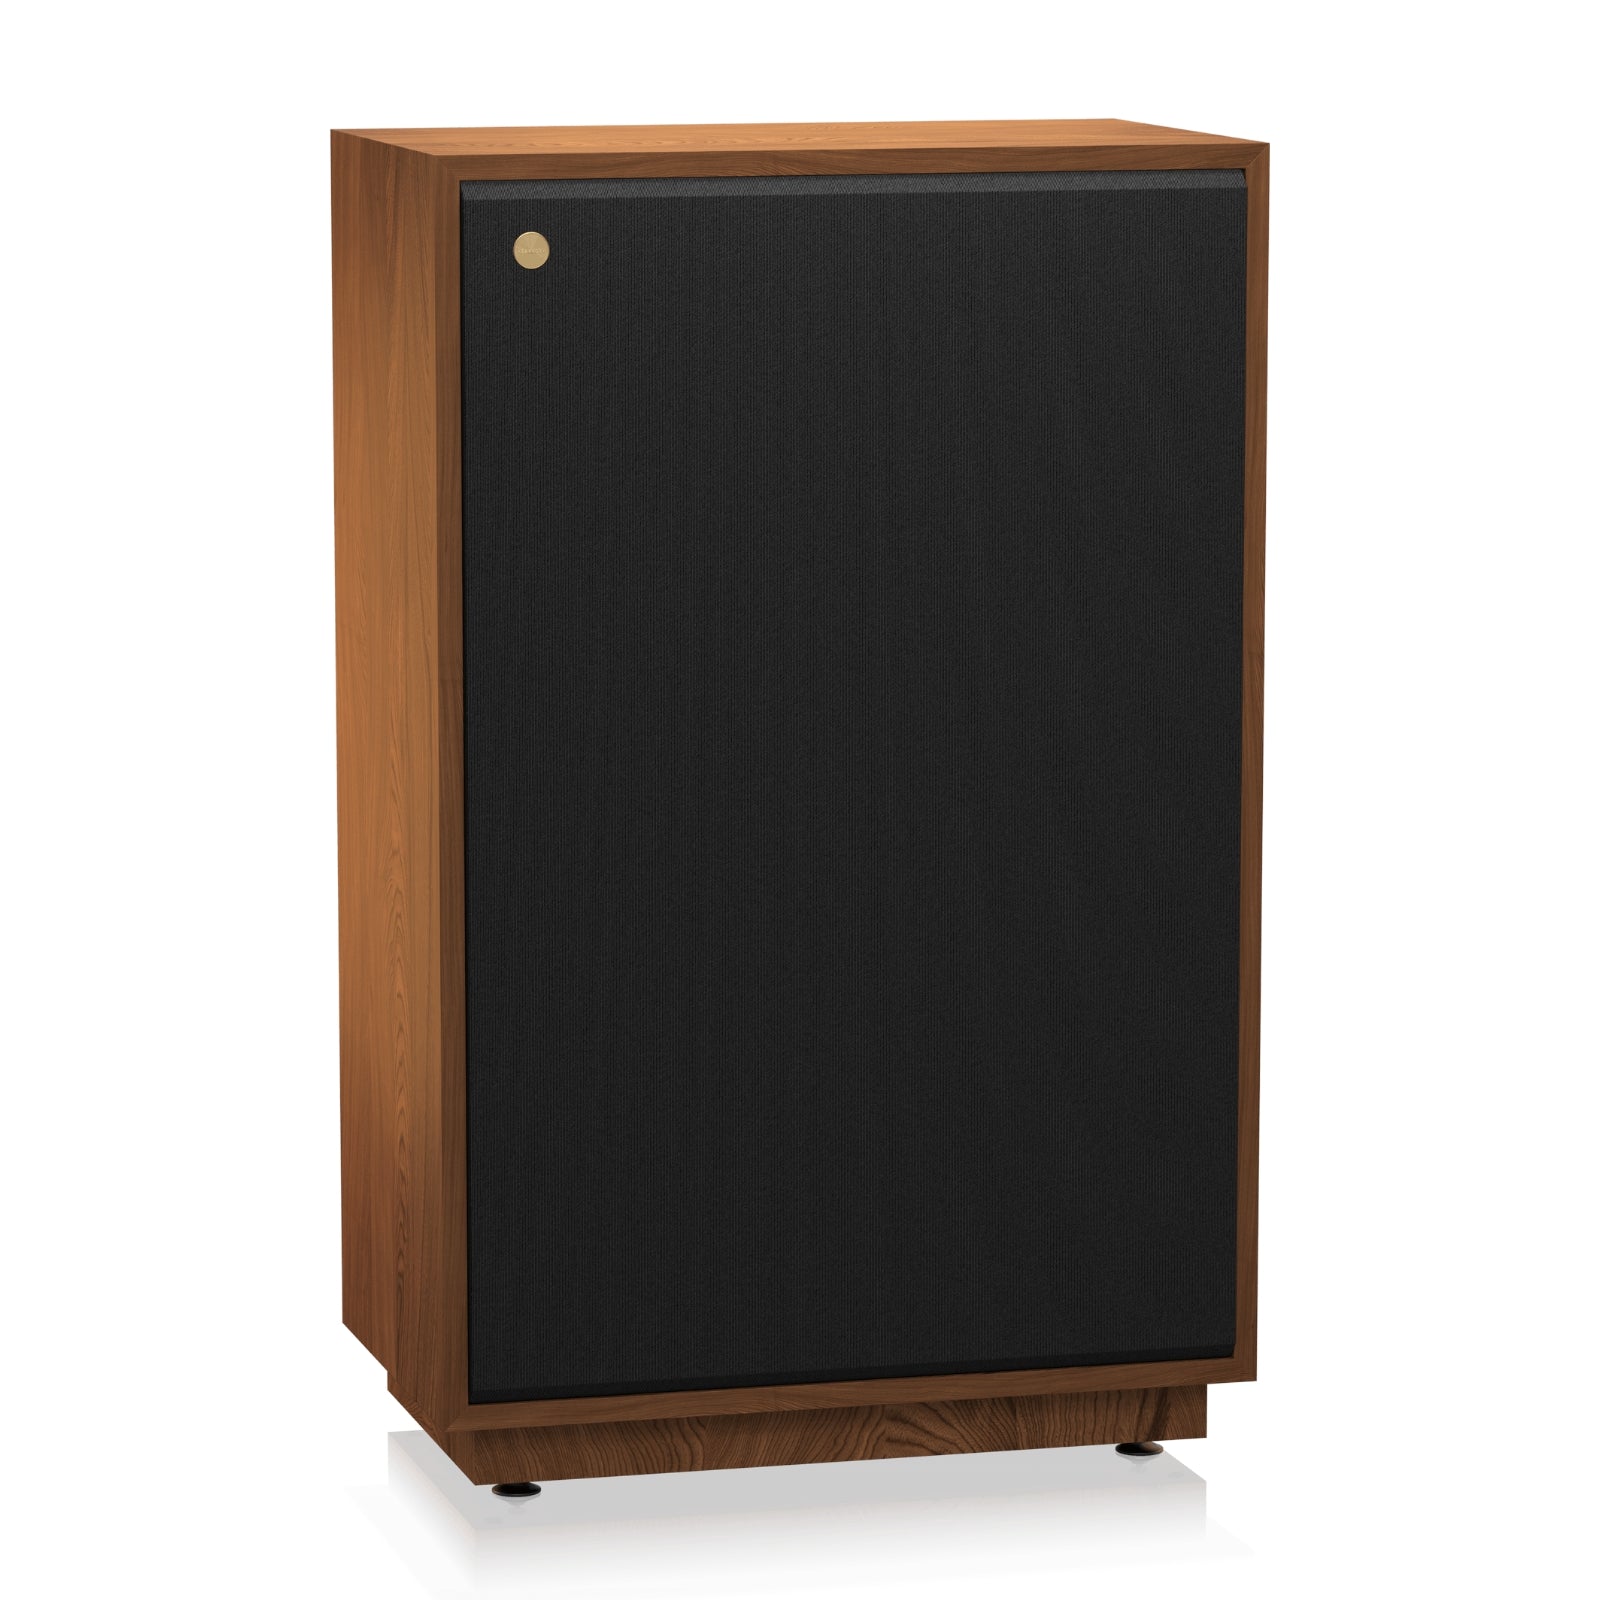 Tannoy SGM 15 - Super Gold Monitor Series